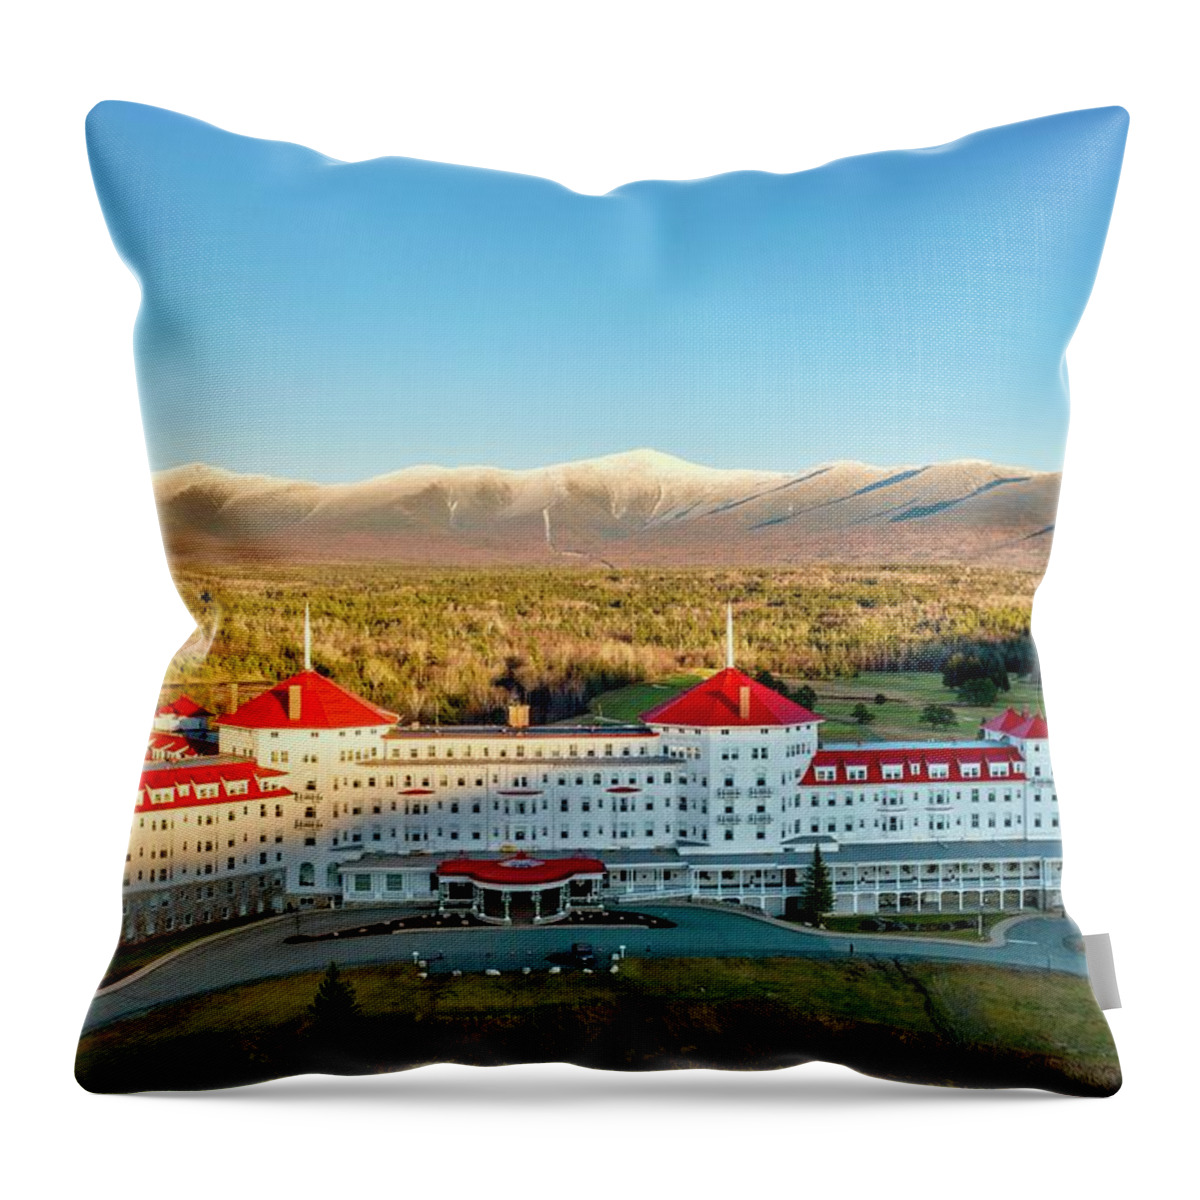  Throw Pillow featuring the photograph Bretton Woods by John Gisis